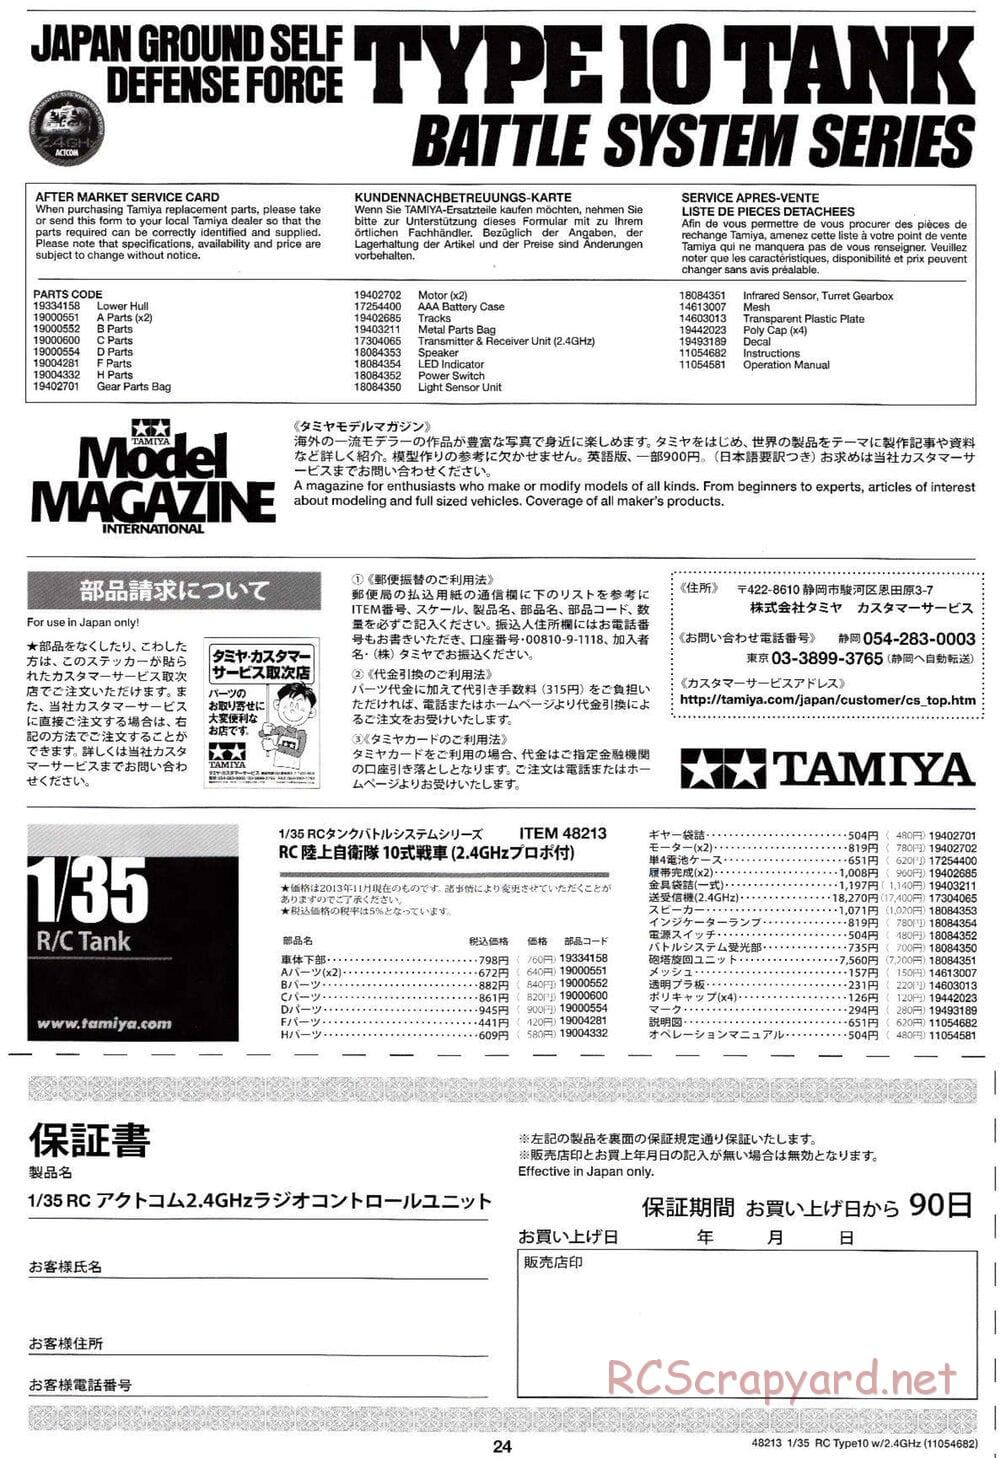 Tamiya - JGSDF Type 10 Tank - 1/35 Scale Chassis - Manual - Page 24